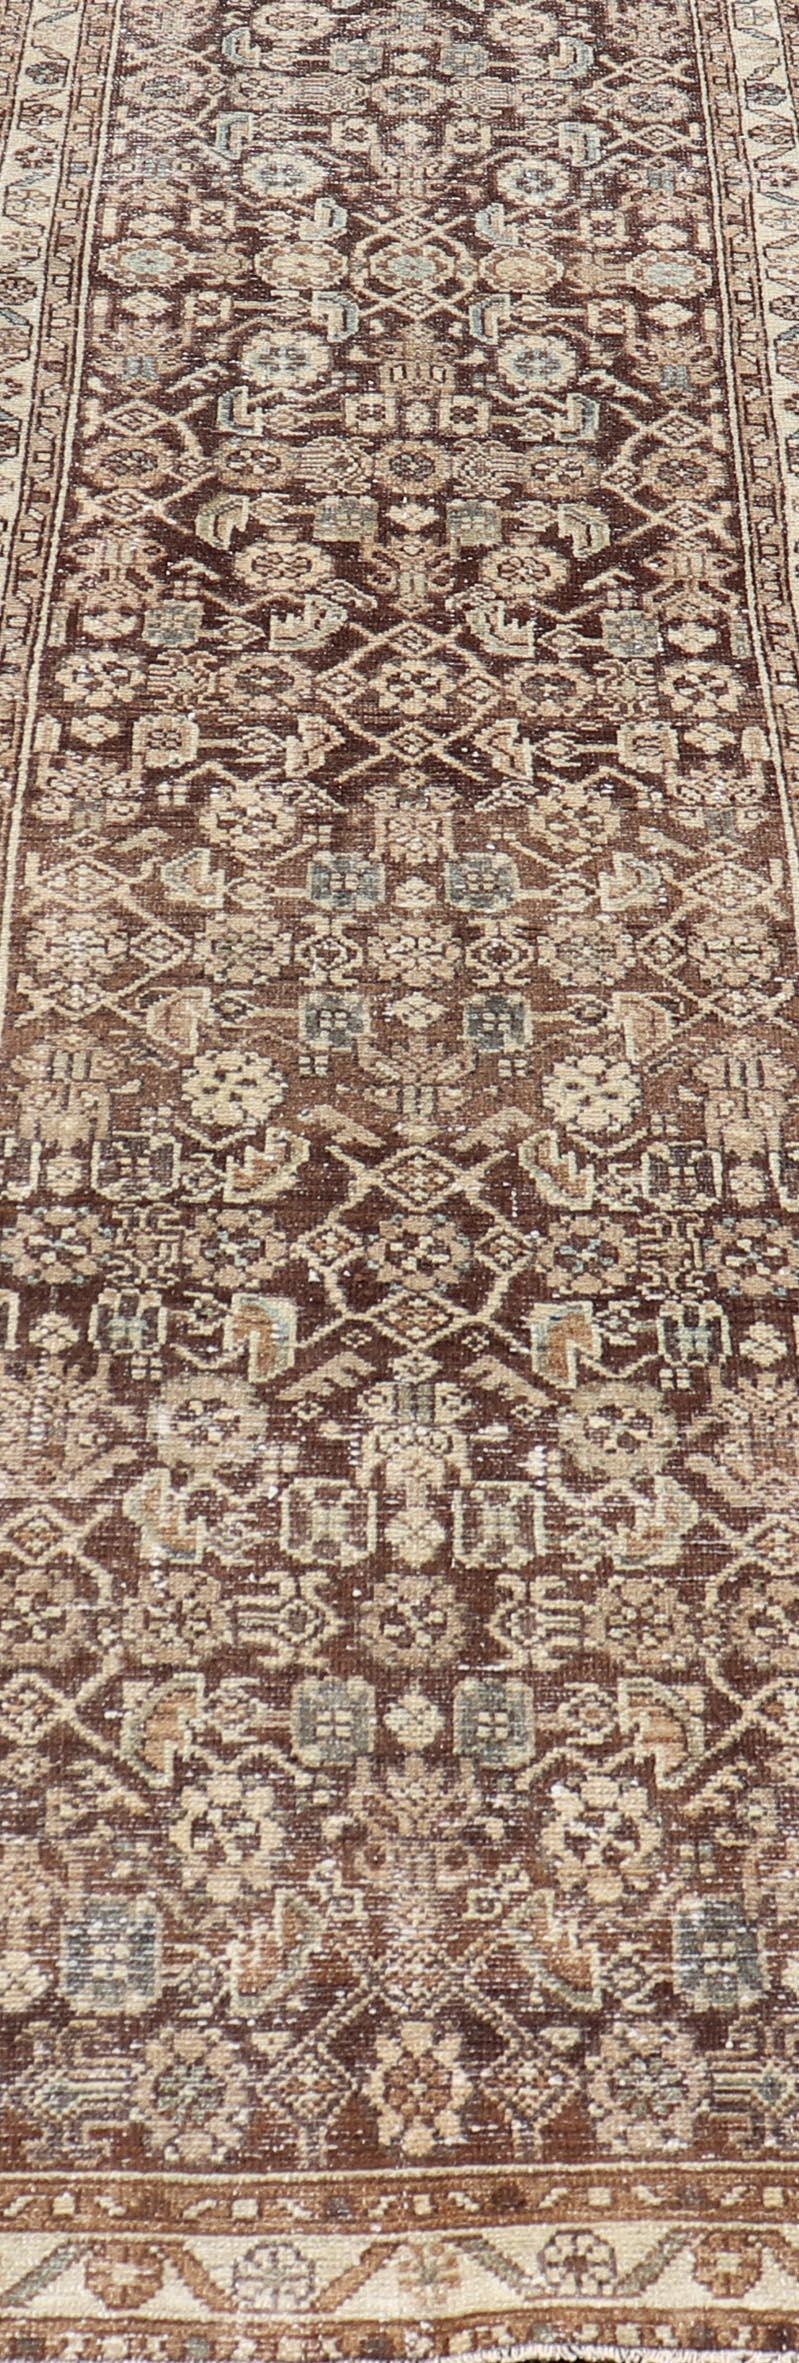 20th Century Antique Persian Hamadan Runner in Warm Tones of Grey, Brown, and L. Brown For Sale